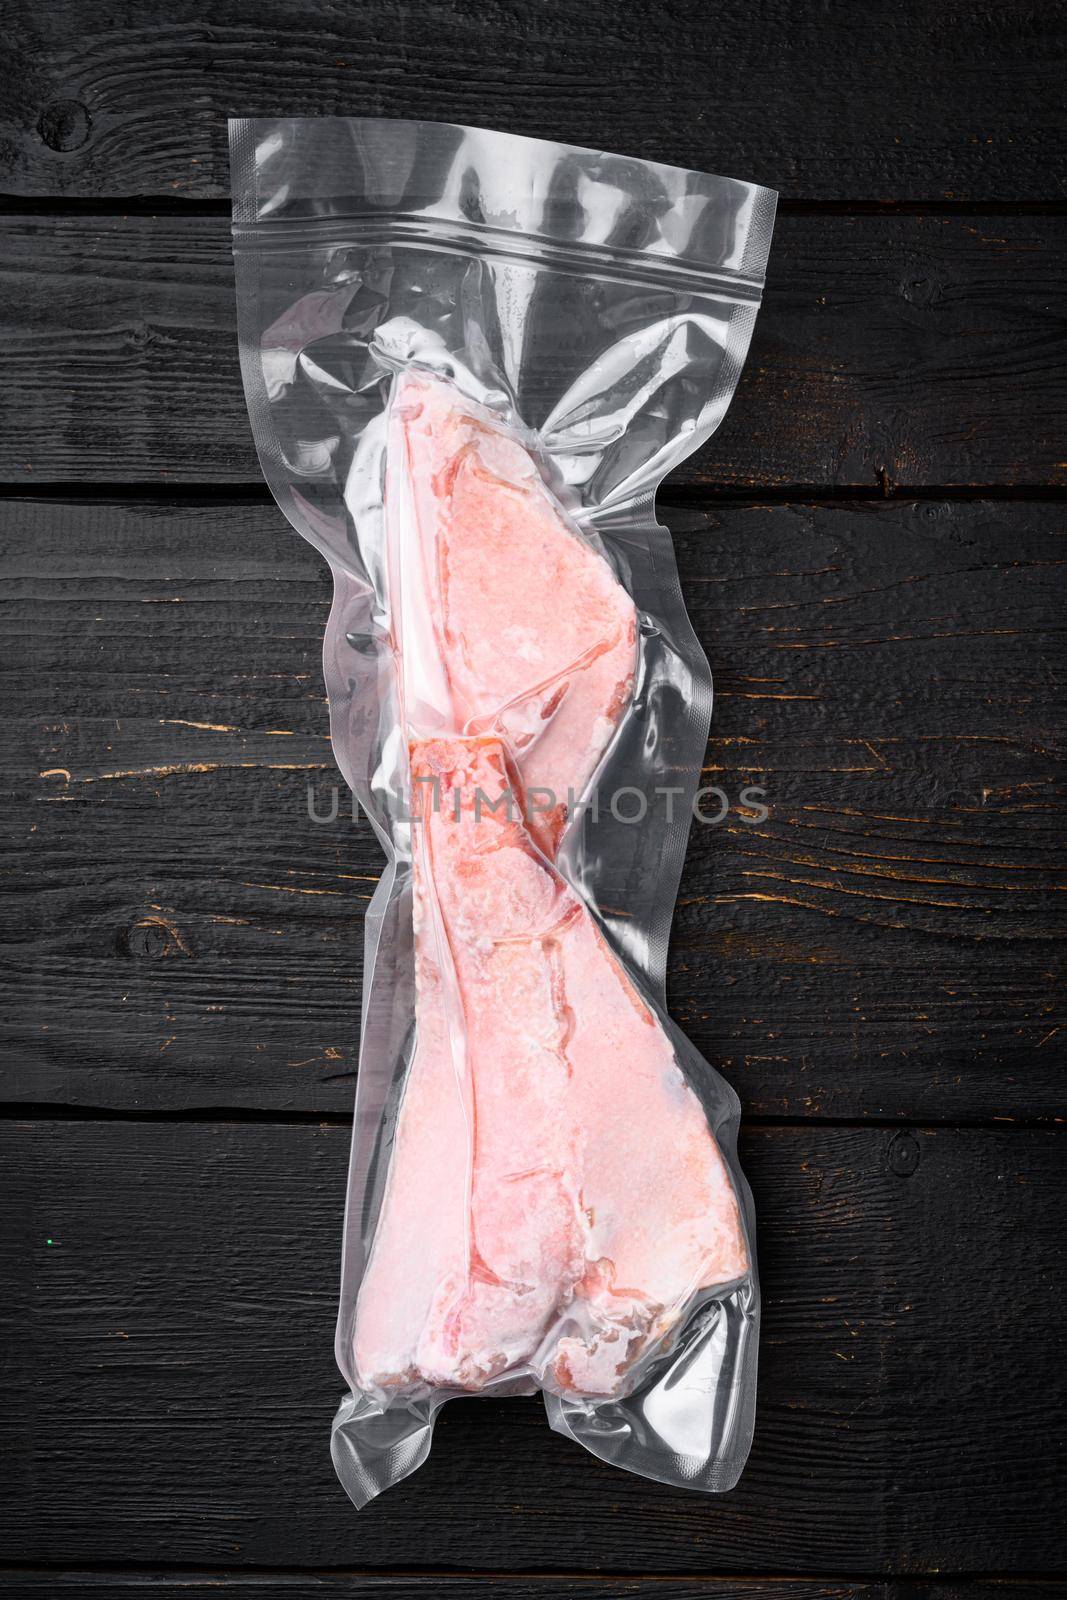 Orange roughy frozen pack fish meat, on black wooden table background, top view flat lay by Ilianesolenyi